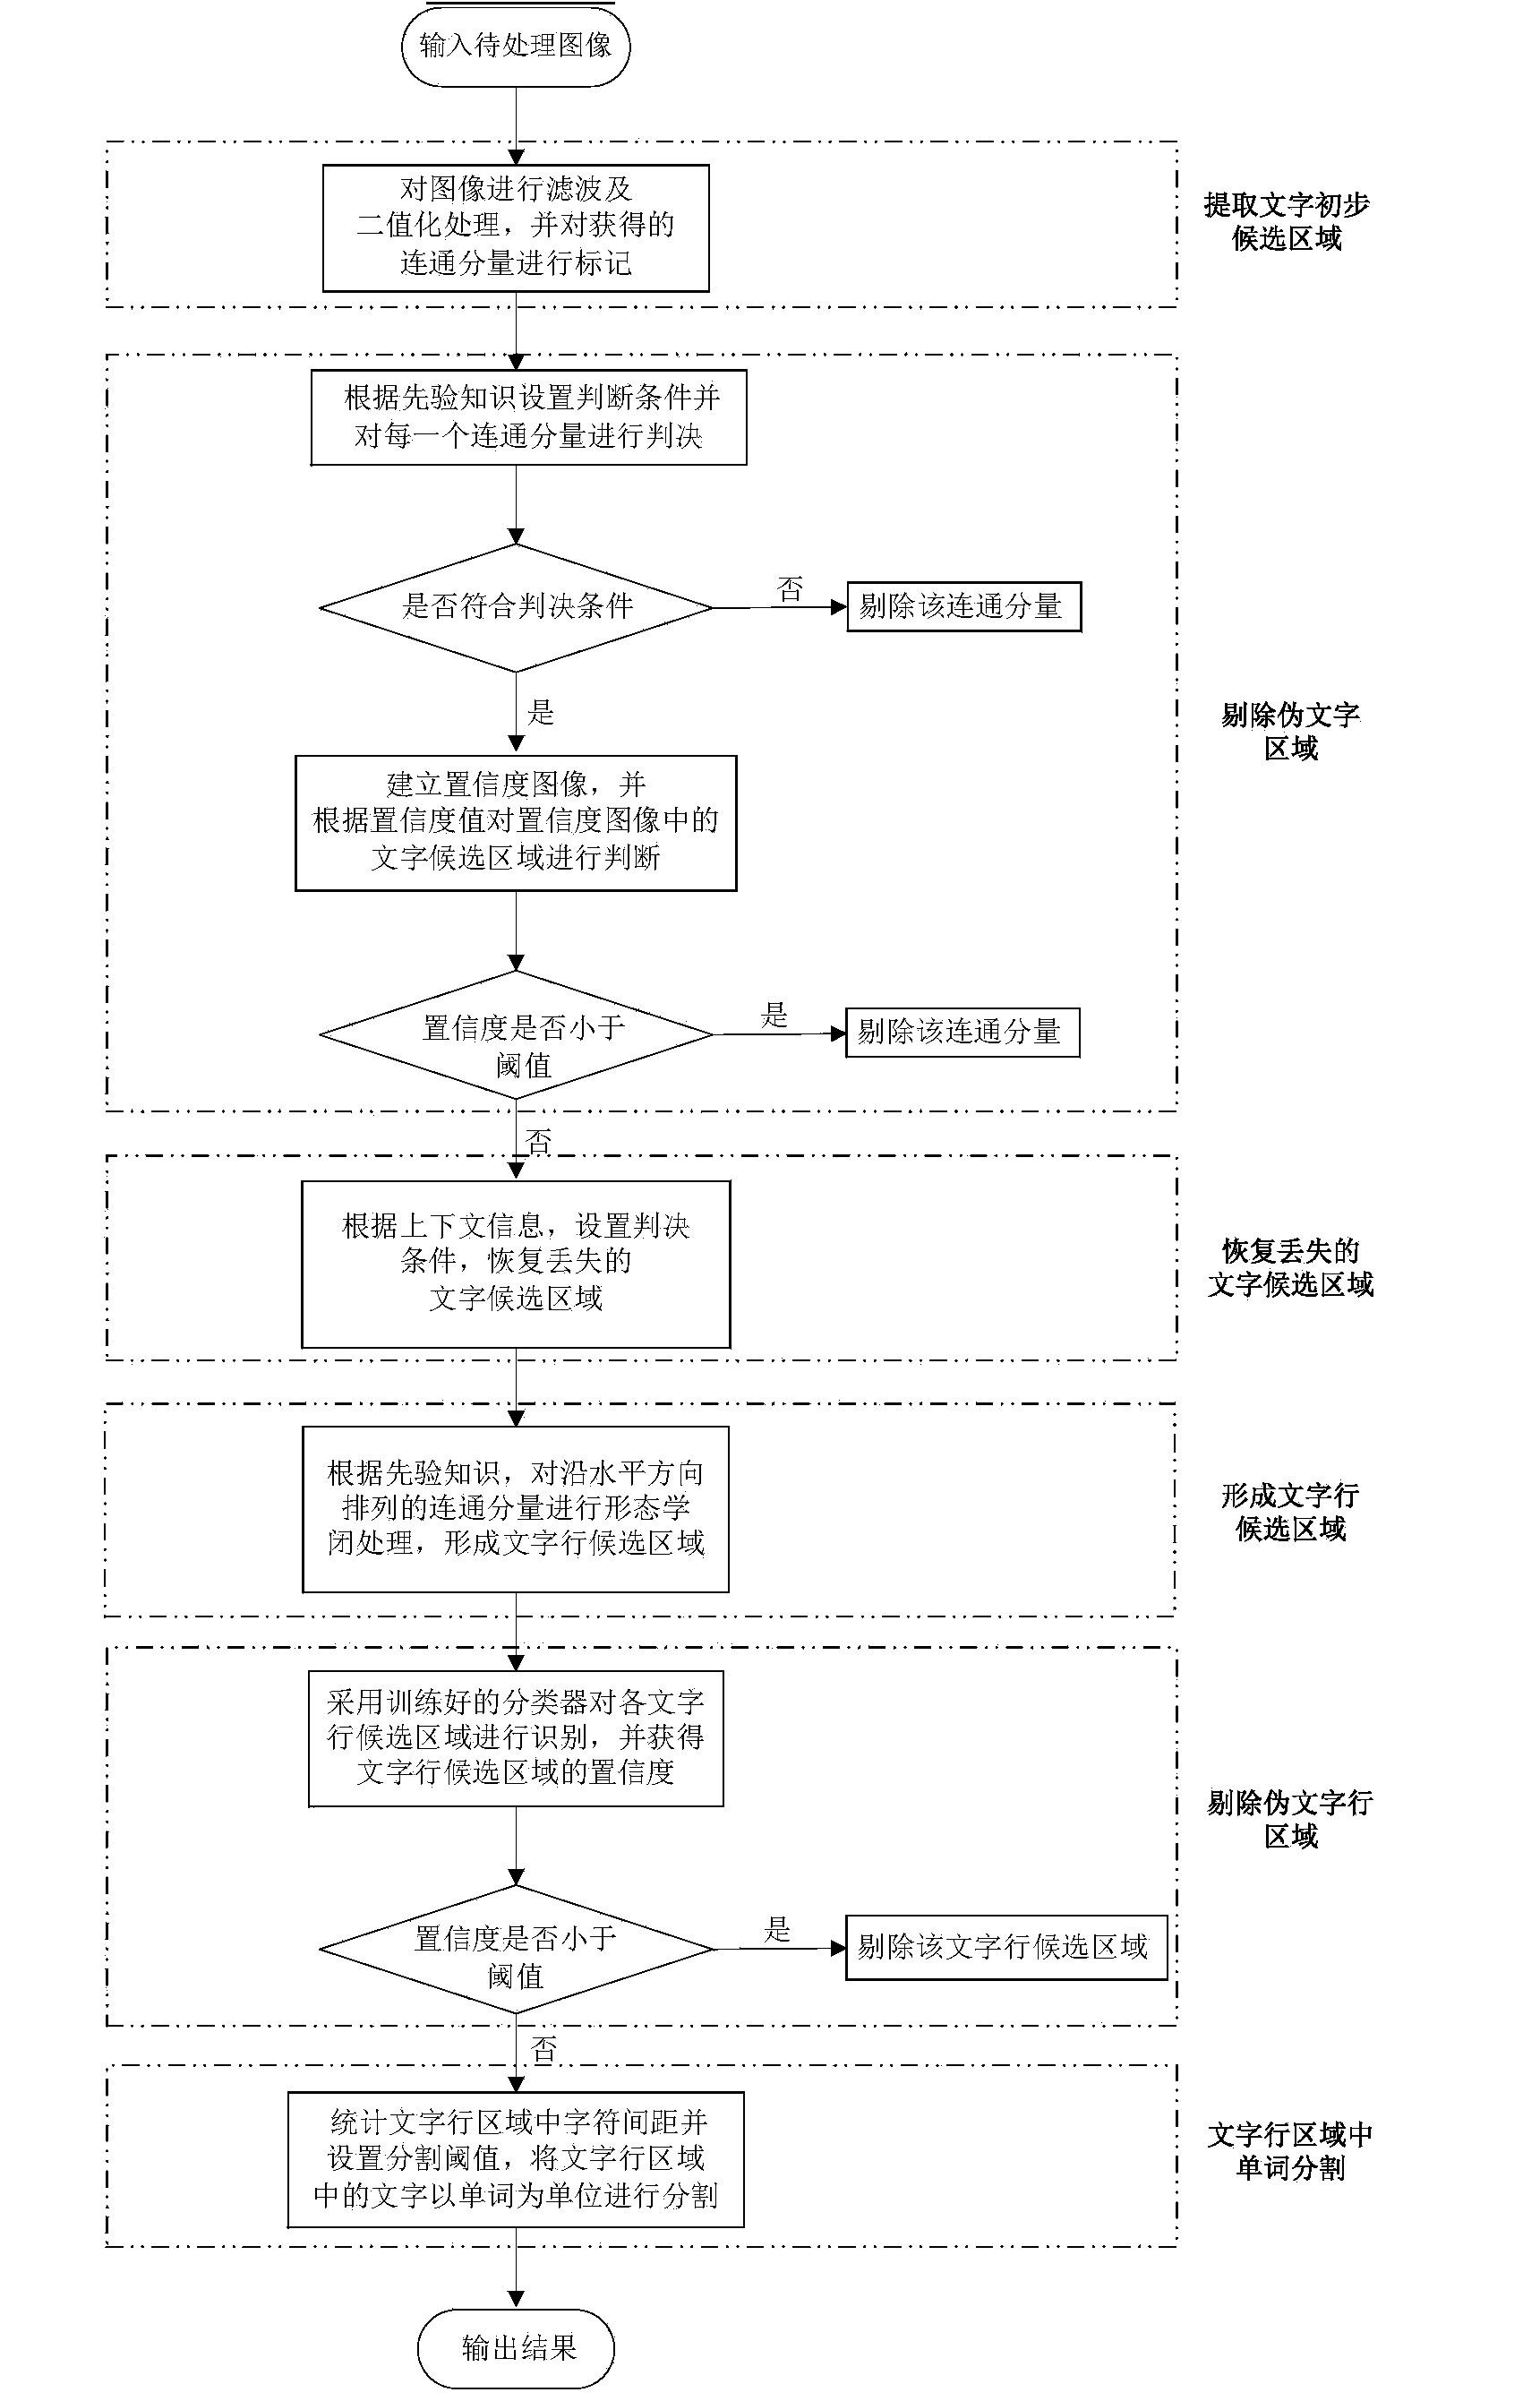 Natural scene character detection method and system